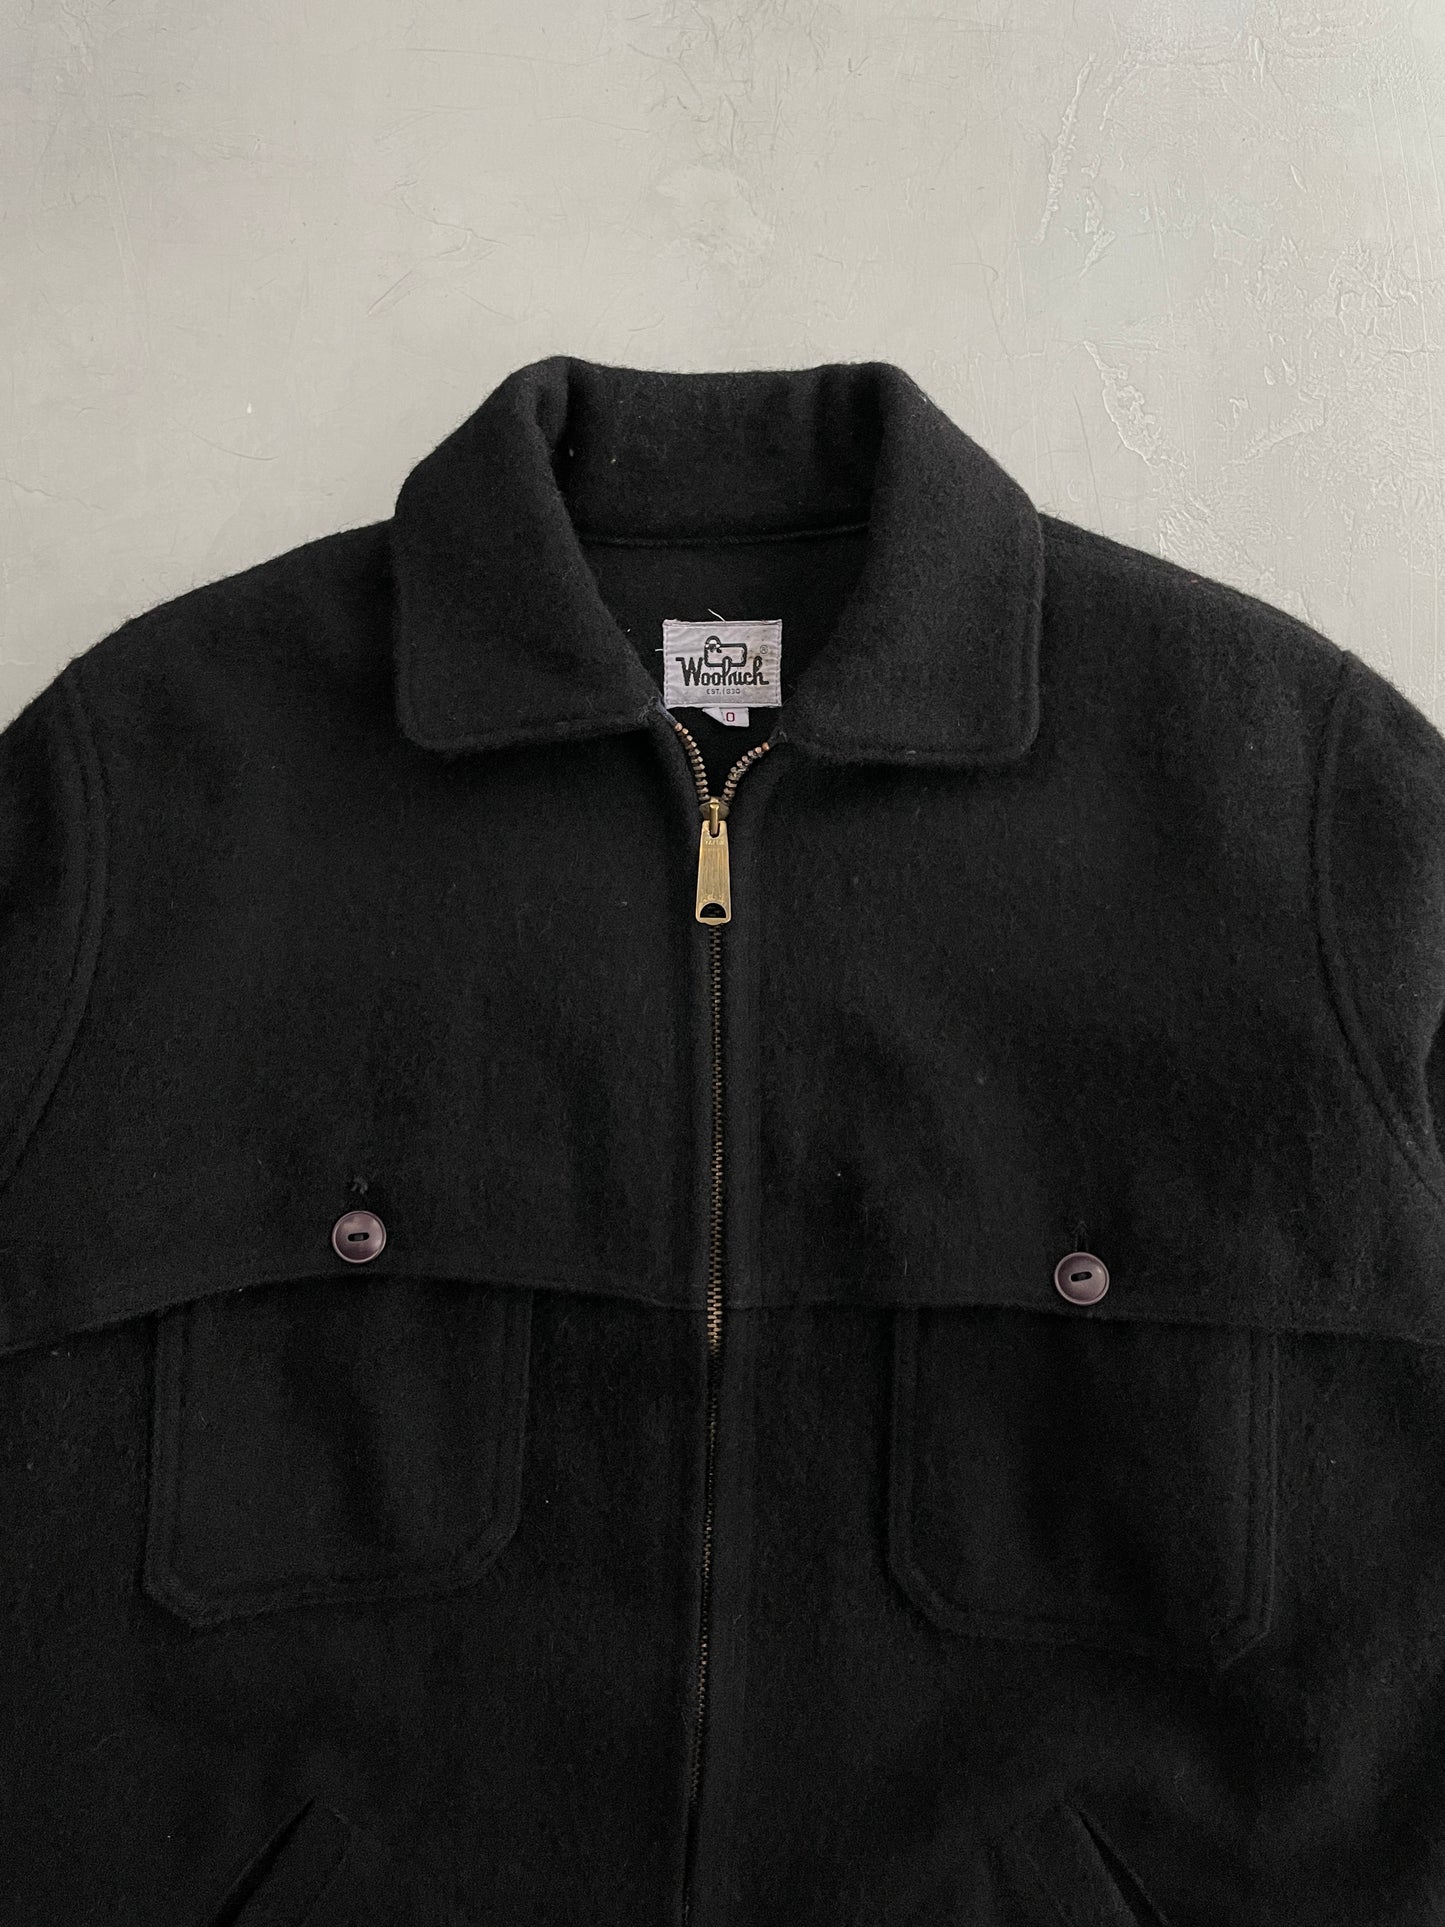 Overdyed Woolrich Jacket [M/L]